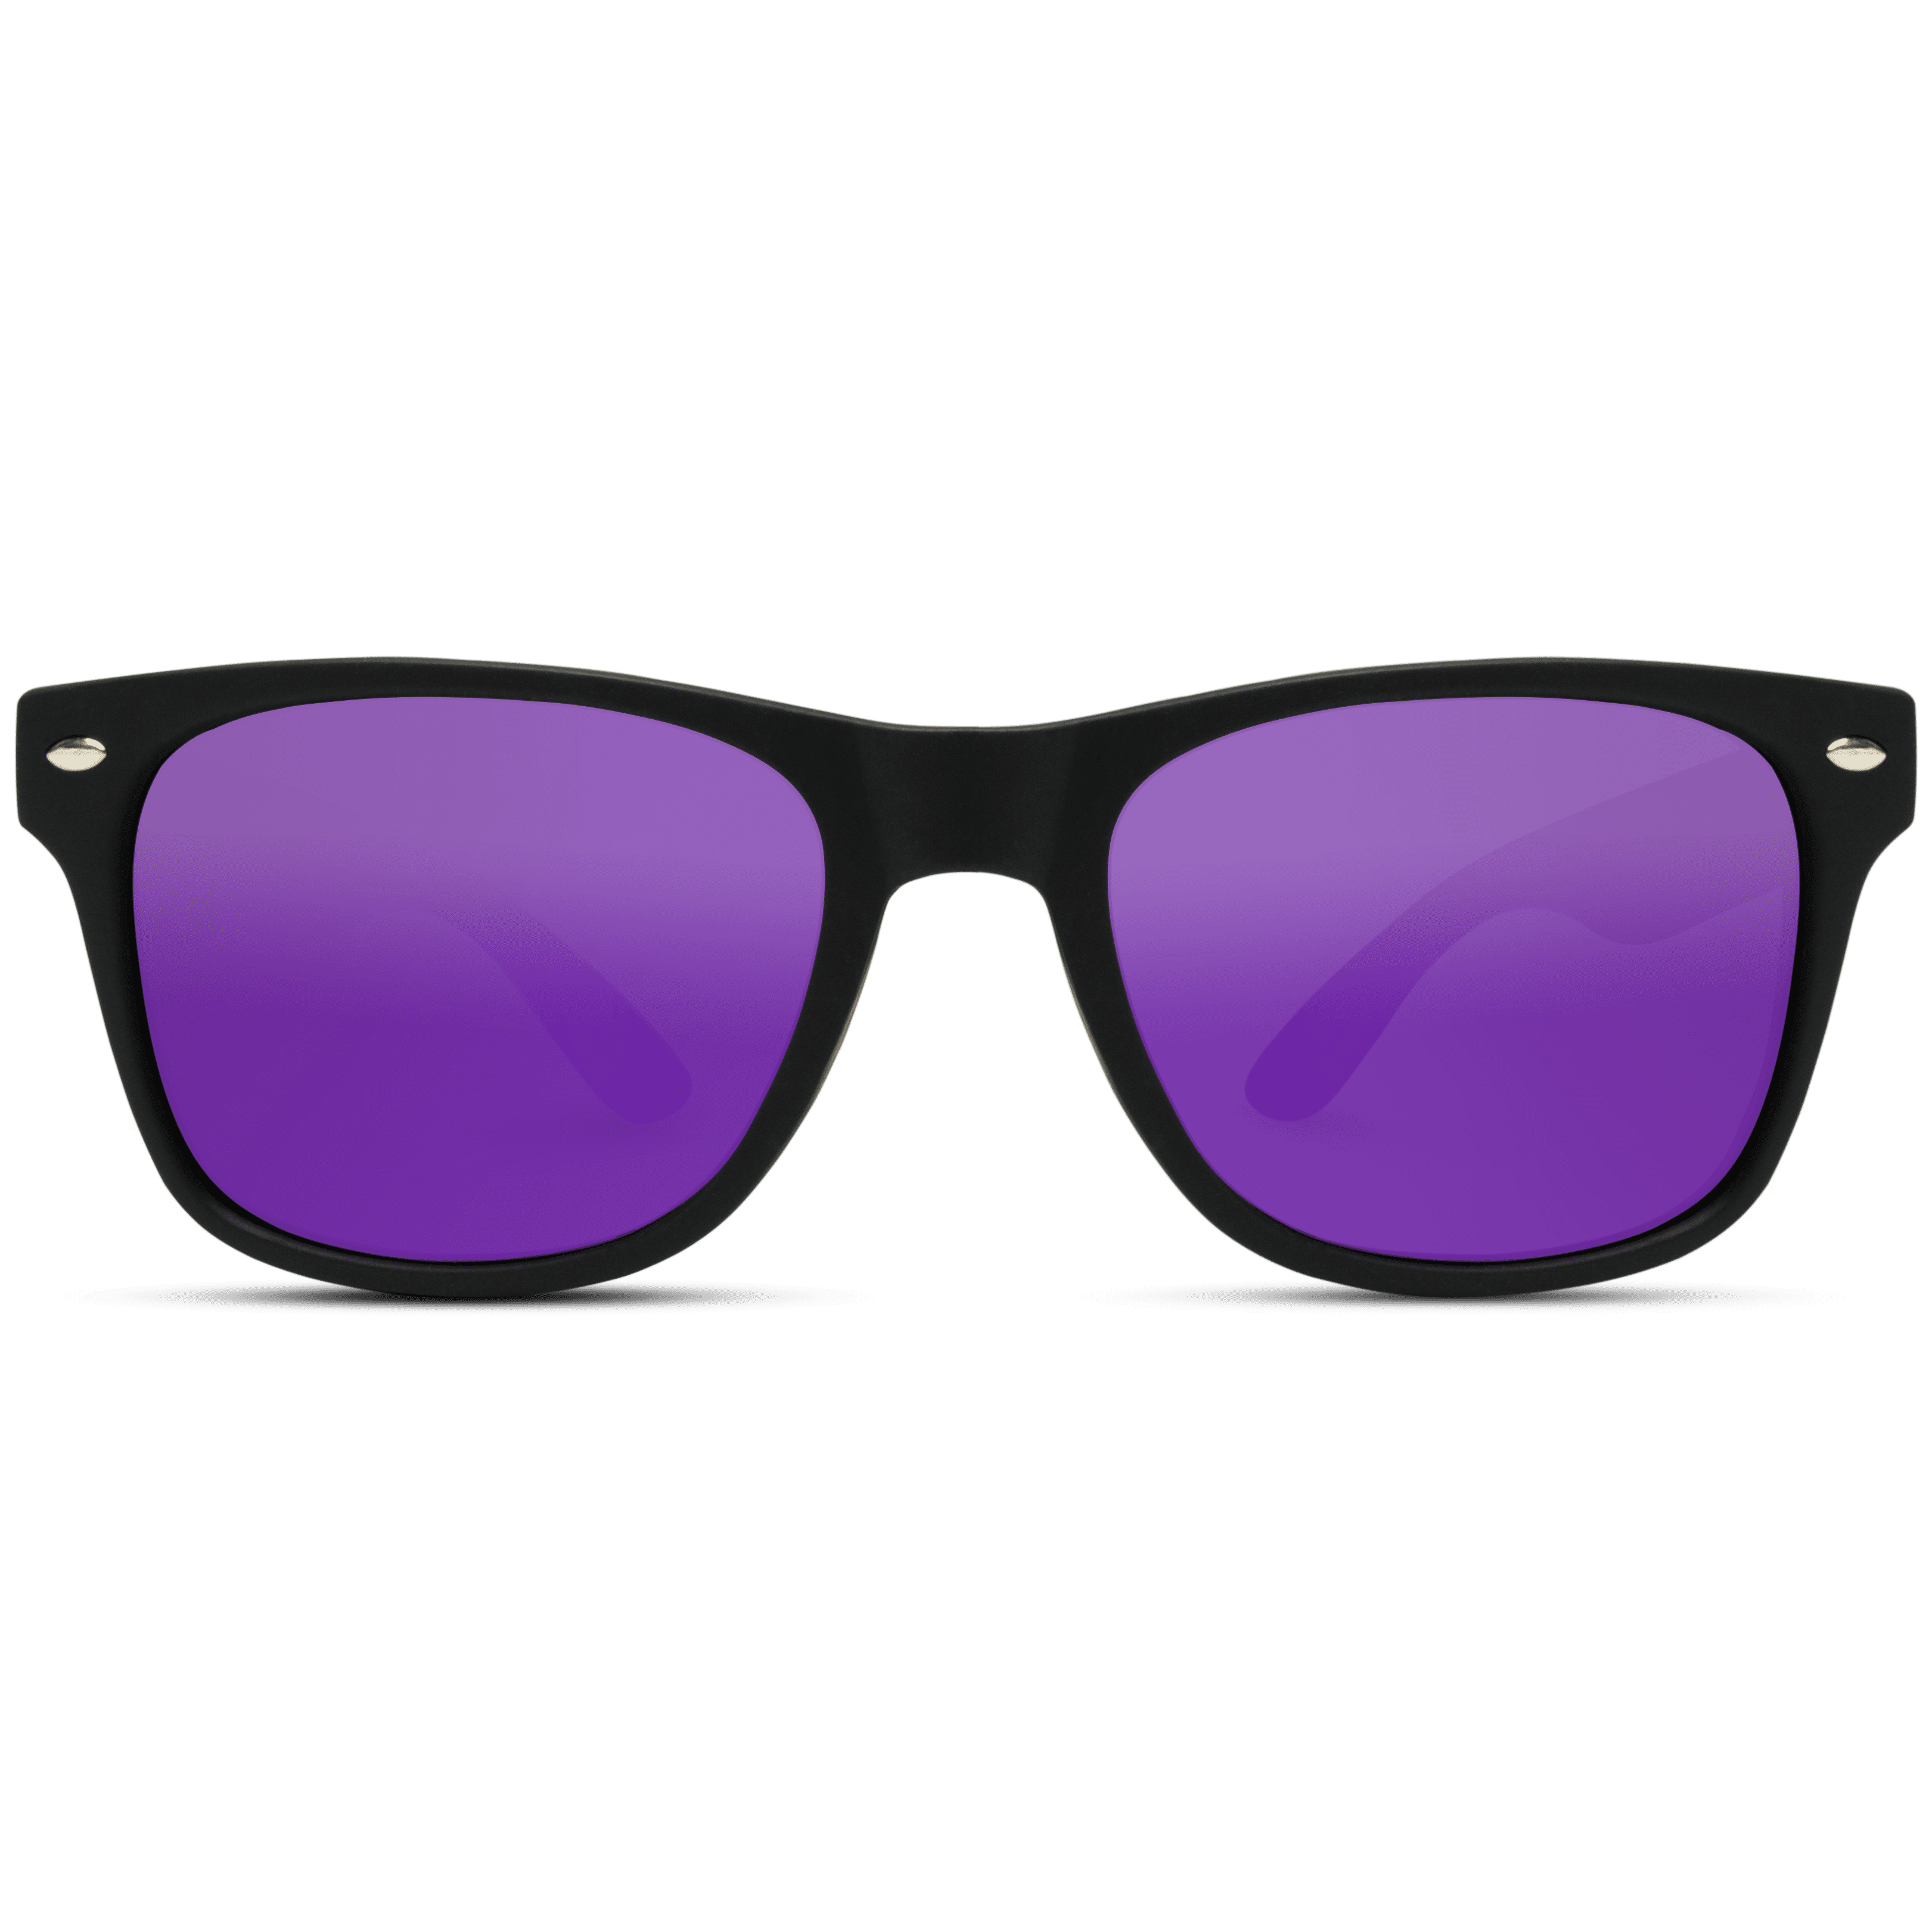 UV Sunglasses with Matte Finish Reflective Color Mirror Lens Large Square and Multi Options